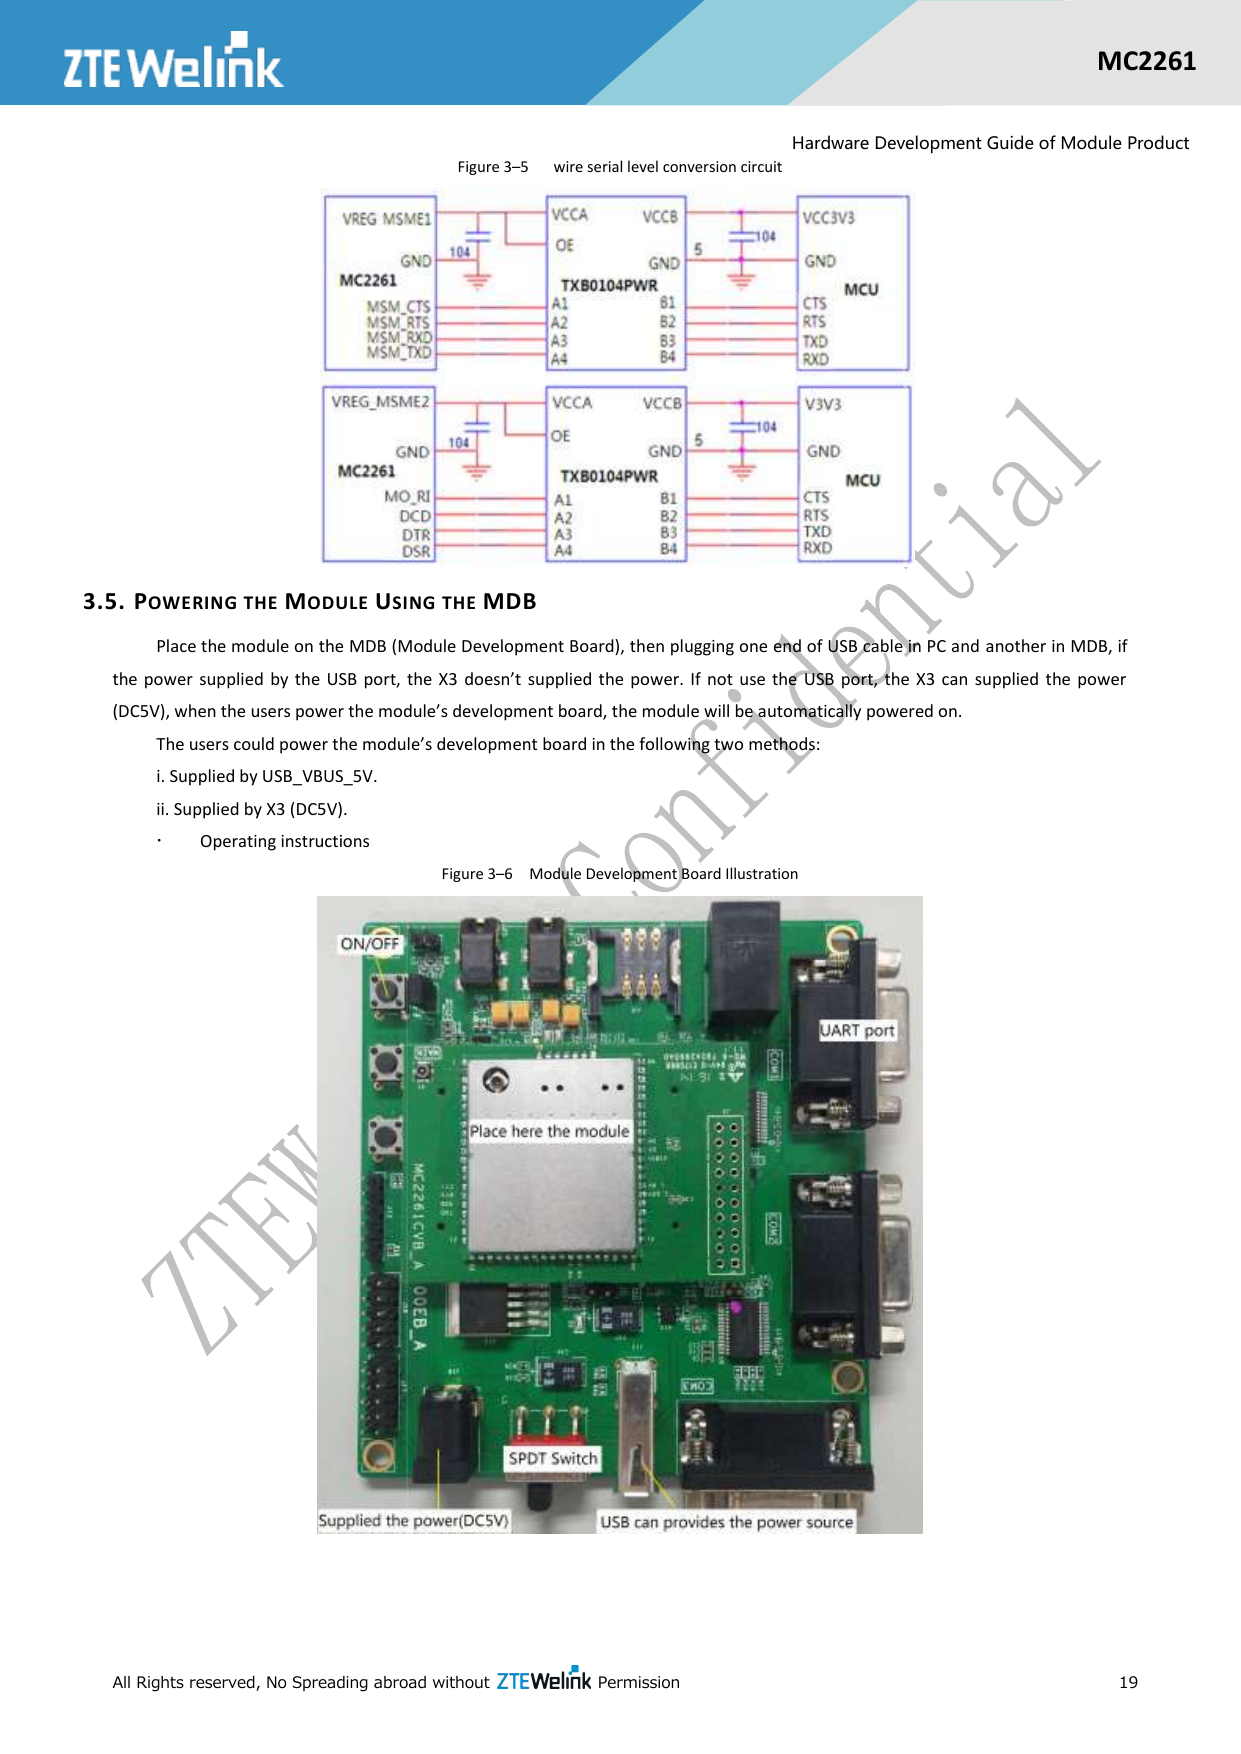  All Rights reserved, No Spreading abroad without    Permission      19  MC2261  Hardware Development Guide of Module Product Figure 3–5    wire serial level conversion circuit    3.5. POWERING THE MODULE USING THE MDB Place the module on the MDB (Module Development Board), then plugging one end of USB cable in PC and another in MDB, if the power supplied  by  the  USB  port,  the  X3  doesn’t  supplied  the power. If  not  use the USB port,  the X3  can  supplied  the  power (DC5V), when the users power the module’s development board, the module will be automatically powered on. The users could power the module’s development board in the following two methods: i. Supplied by USB_VBUS_5V.   ii. Supplied by X3 (DC5V).    Operating instructions Figure 3–6  Module Development Board Illustration    